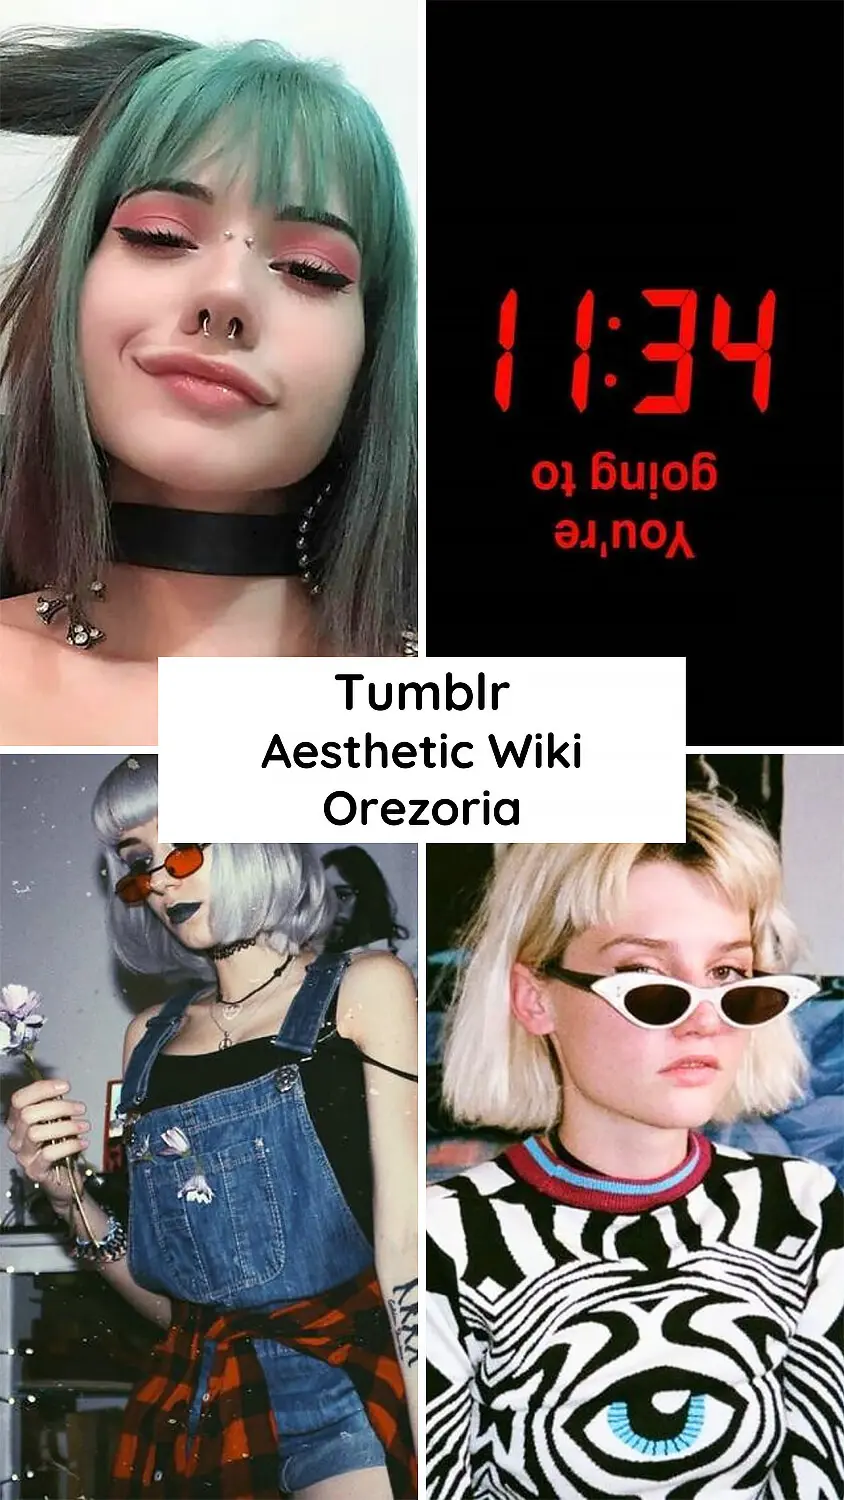 Why Is the 2014 Tumblr Grunge Aesthetic Trending Again?